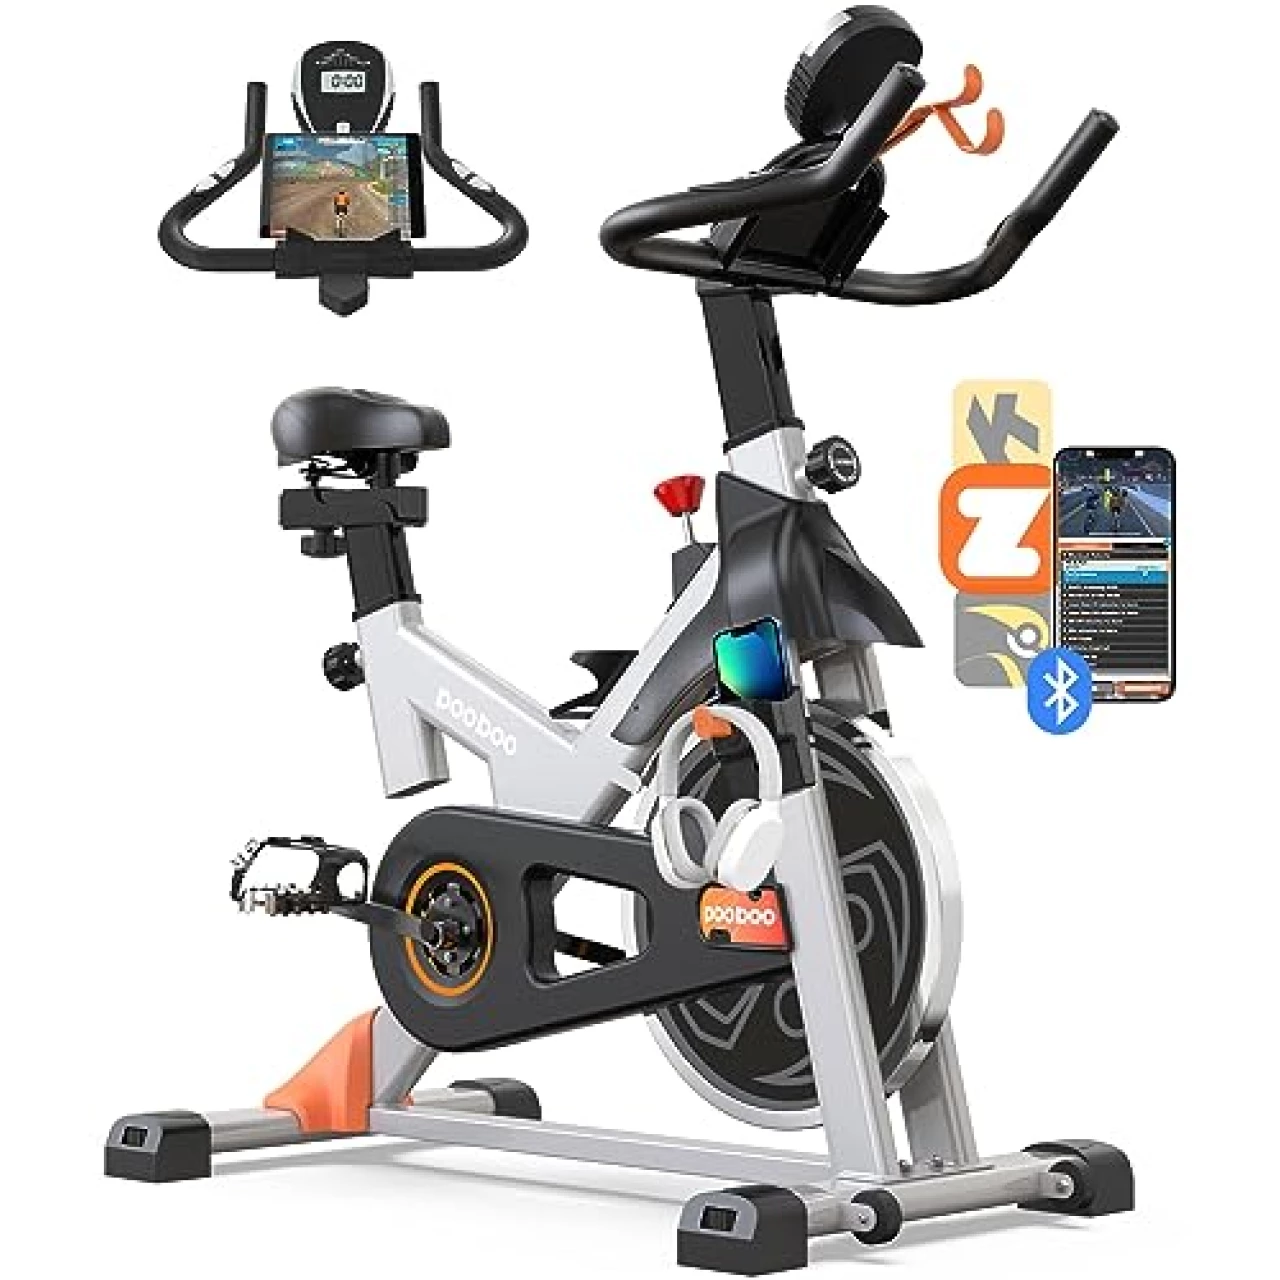 pooboo Magnetic Resistance Indoor Cycling Bike, Belt Drive Indoor Exercise Bike Stationary LCD Monitor with Ipad Mount ＆Comfortable Seat Cushion for Home Cardio Workout Cycle Bike Training Upgraded Version